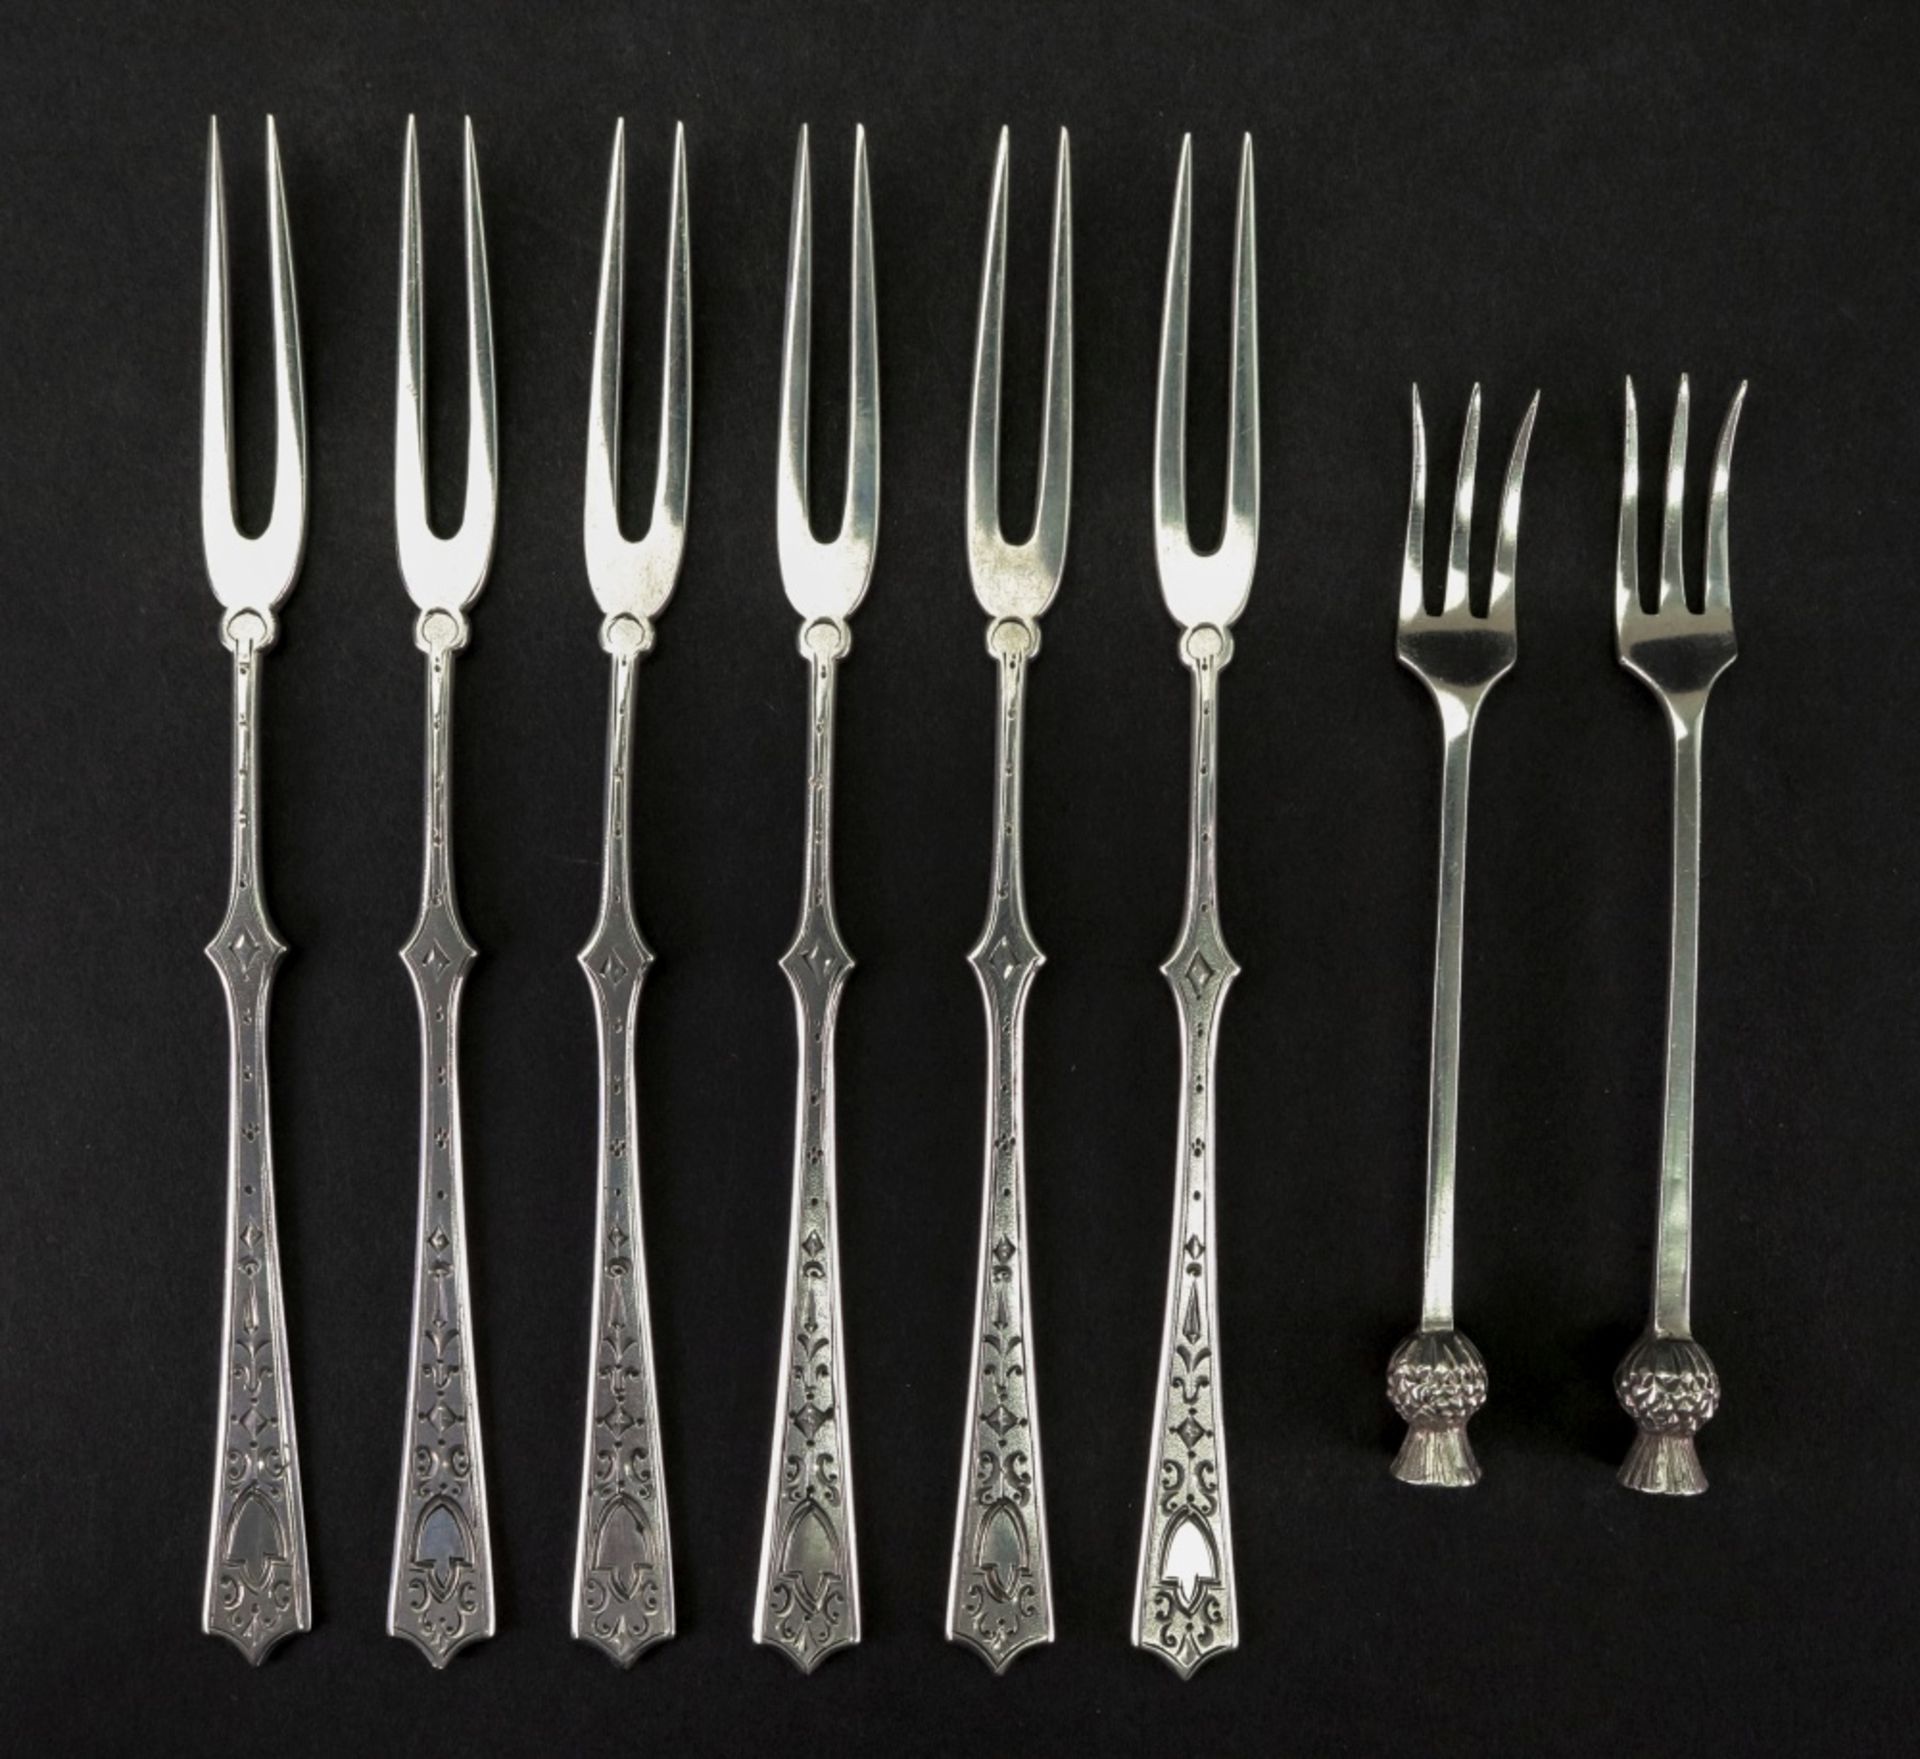 A set of six two prong forks, detailed 800,